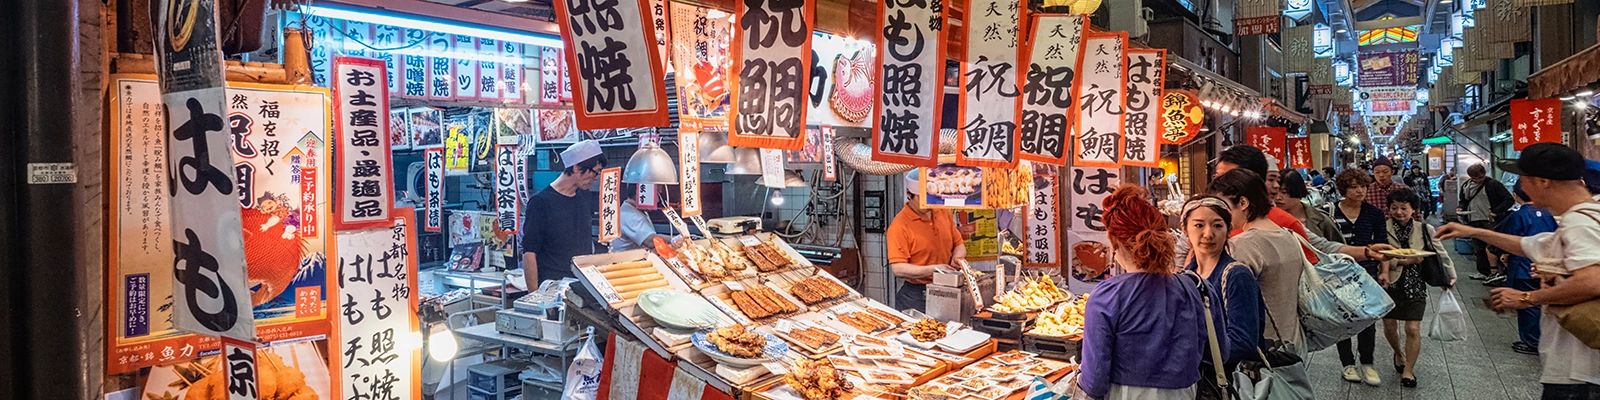 Nishiki Market in Kyoto, Japan - a historic and vibrant food market with a wide variety of traditional Japanese foods, snacks, and souvenirs.